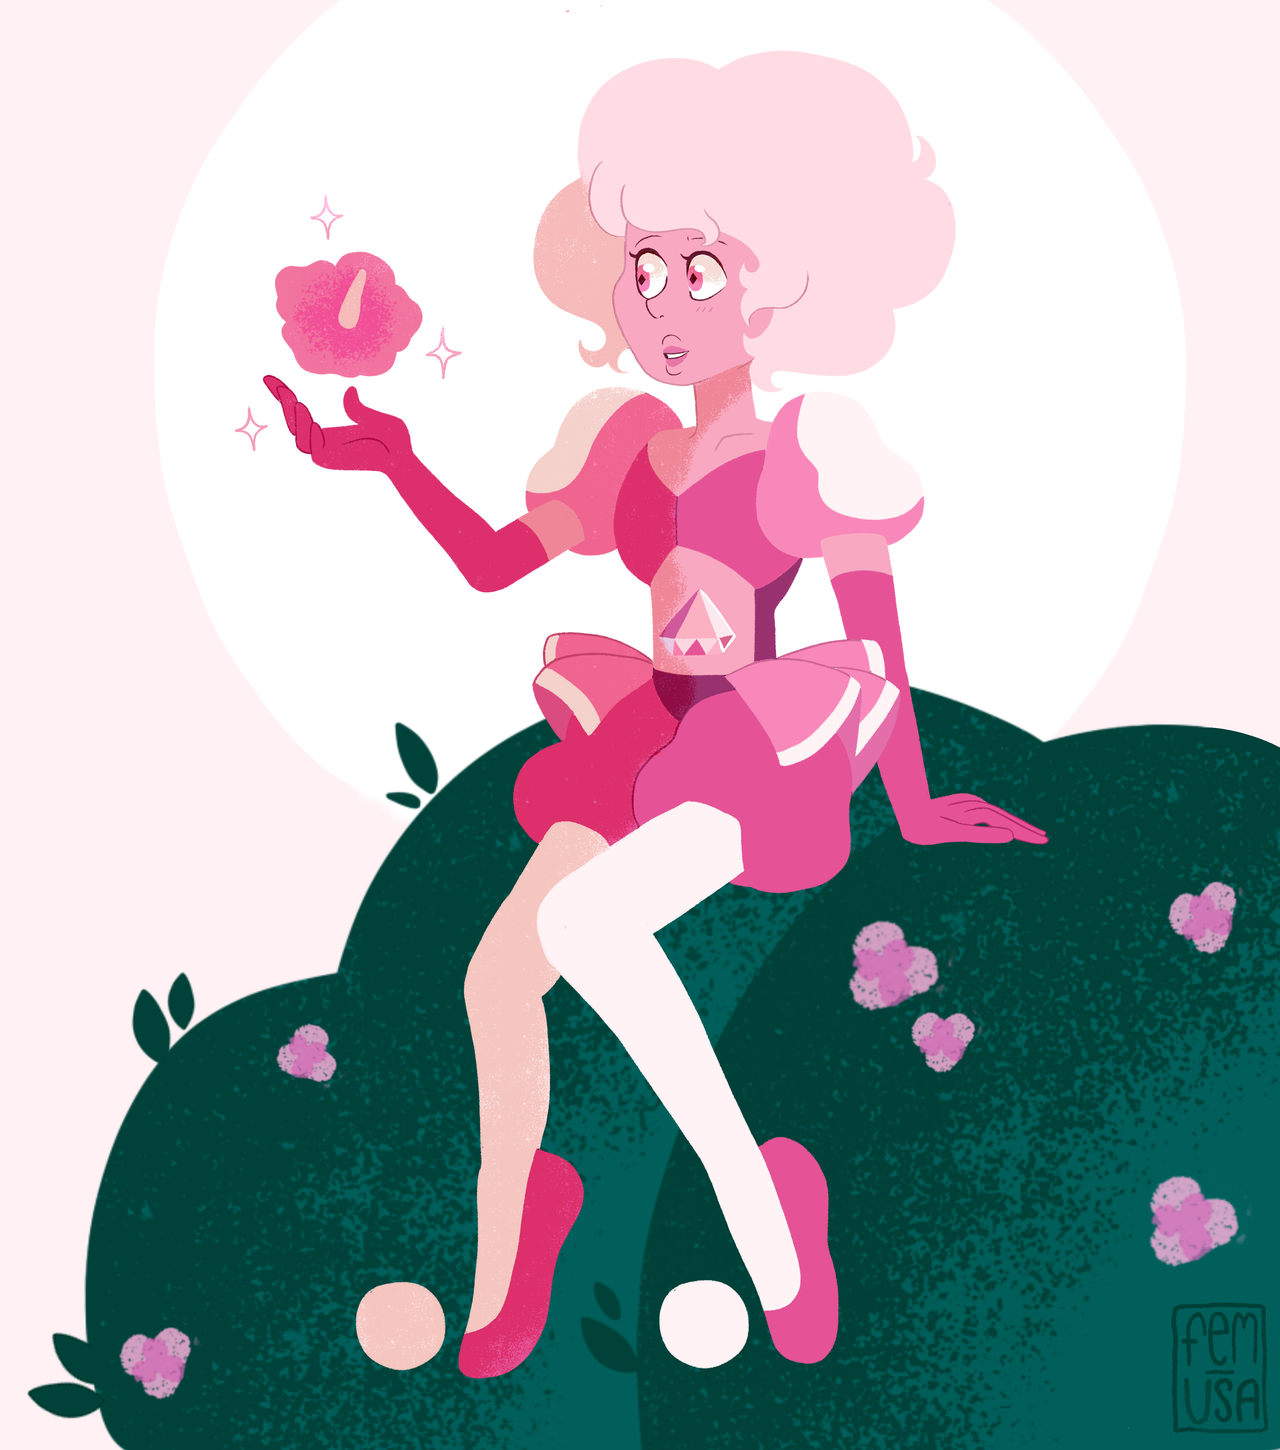 Pink Diamond commission for @permabakedprincess! | commission info